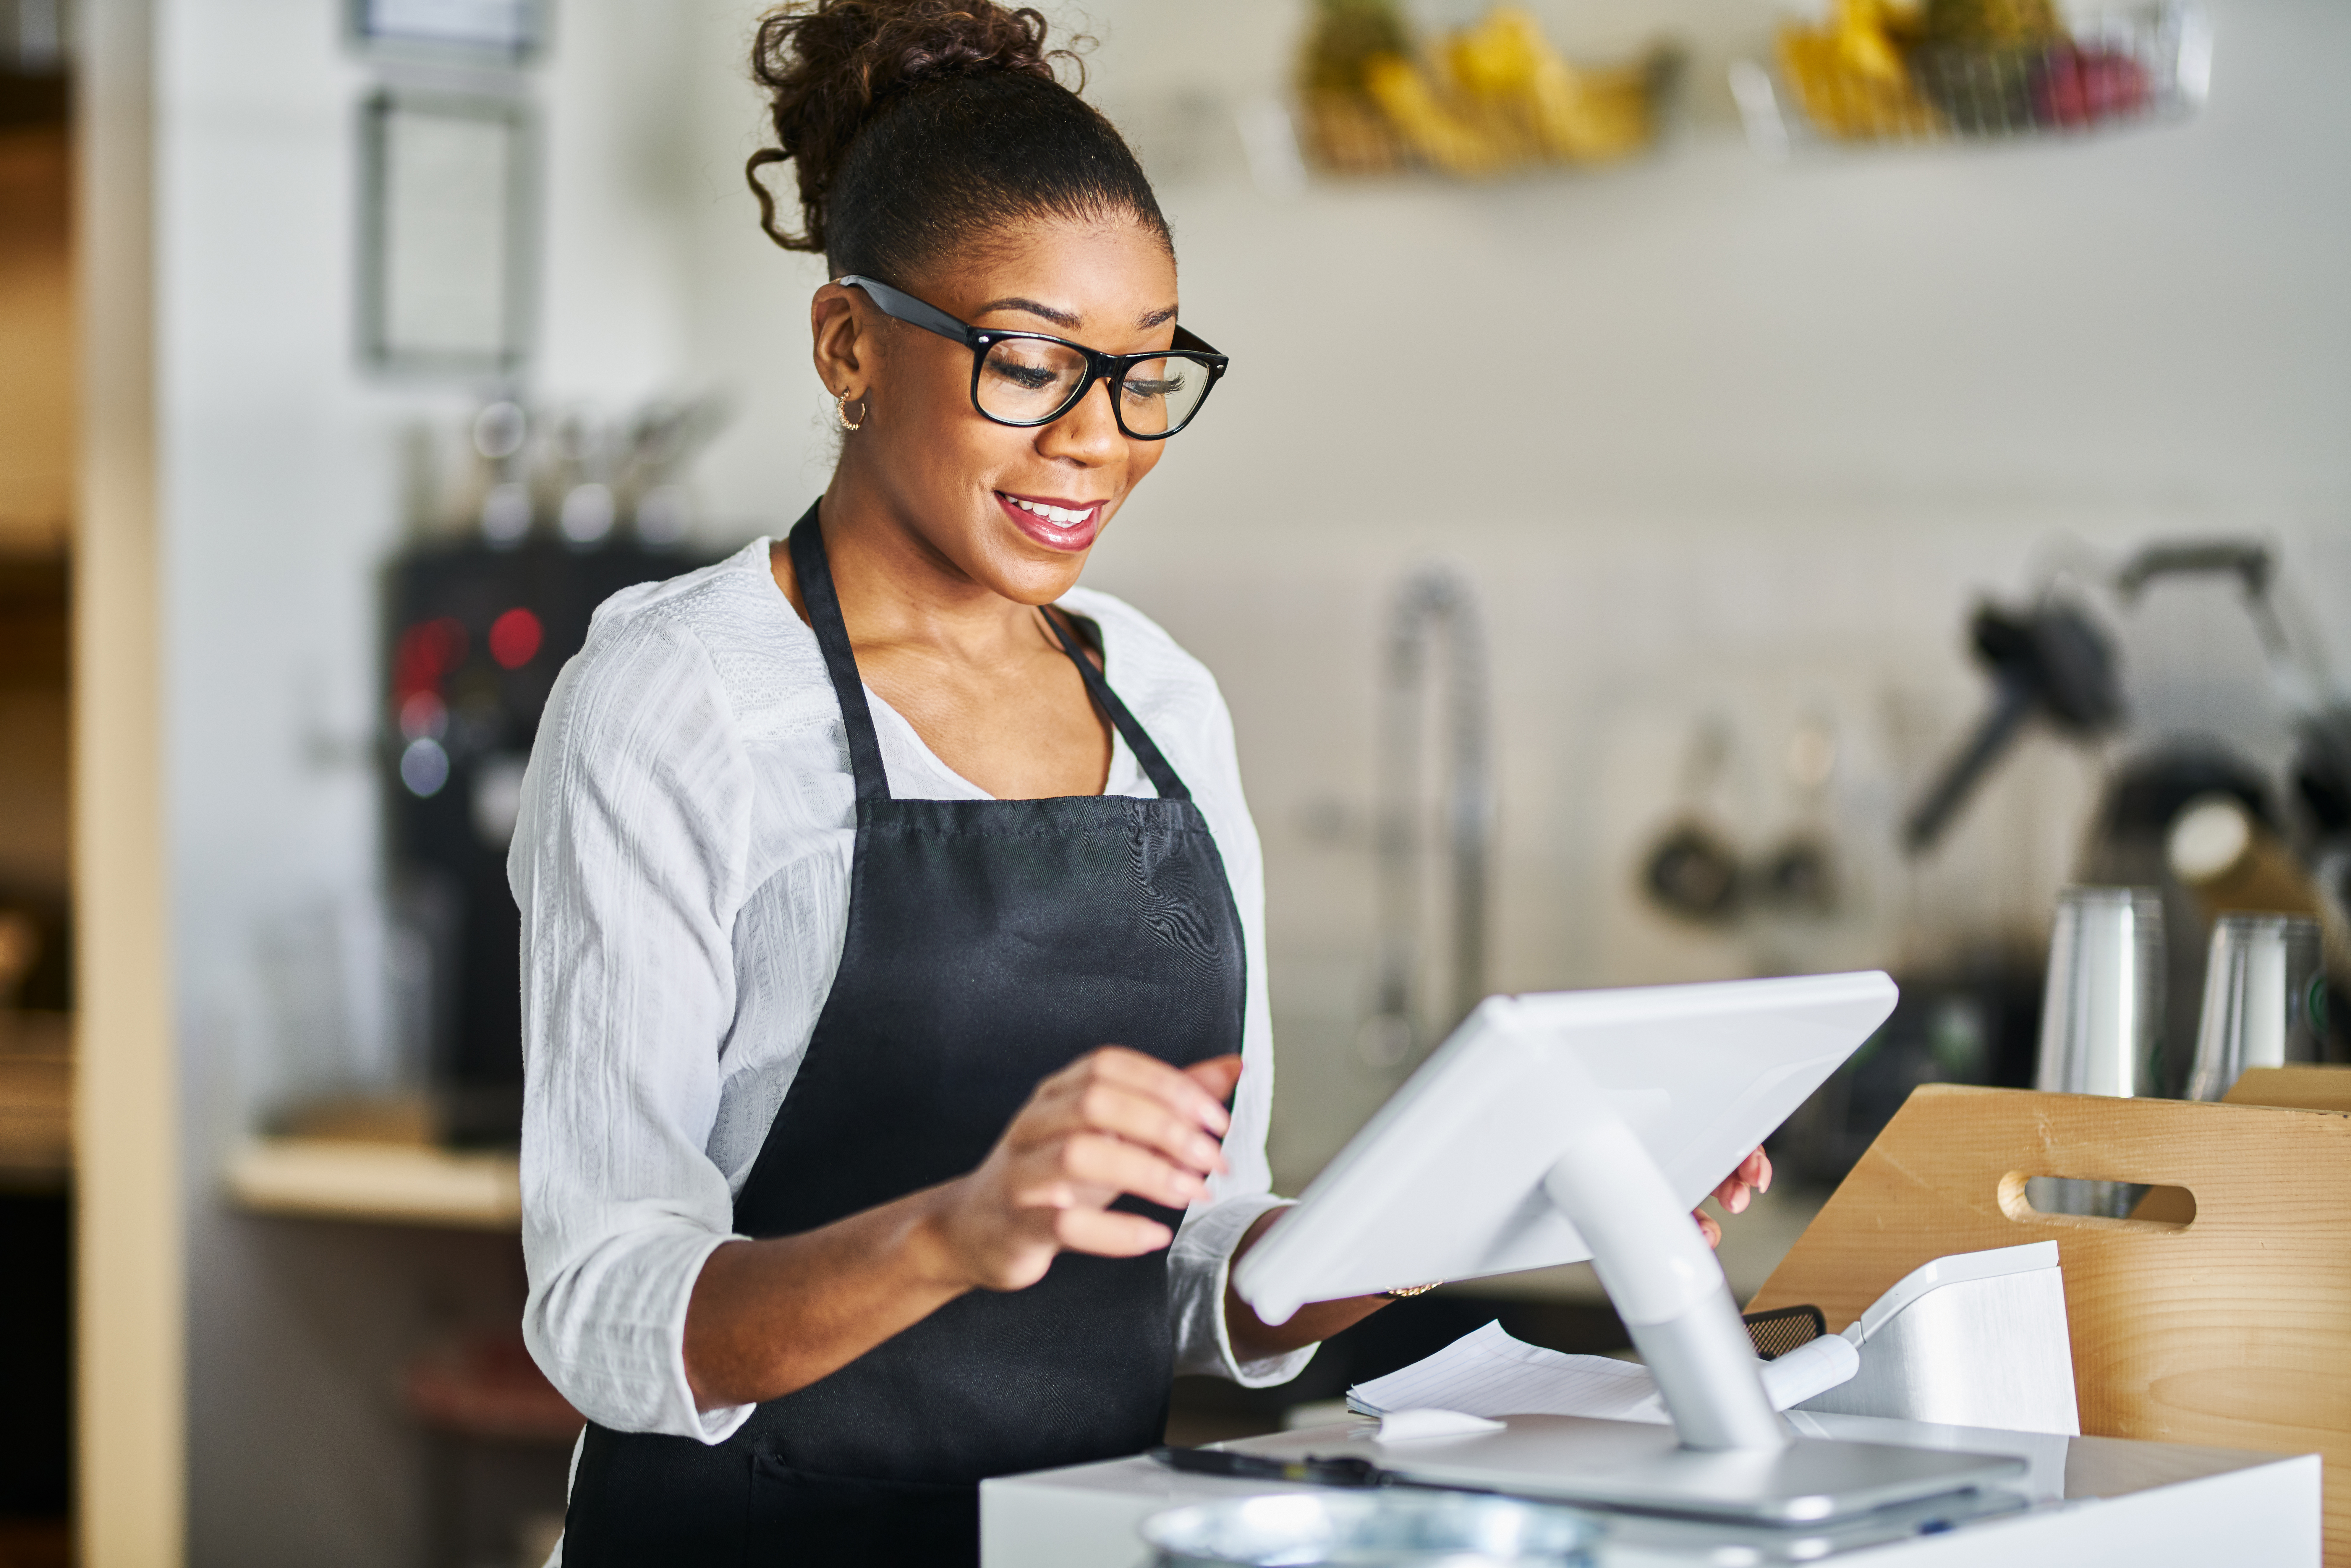 5 Things to Consider When Choosing a Point of Sale System for Your Restaurant